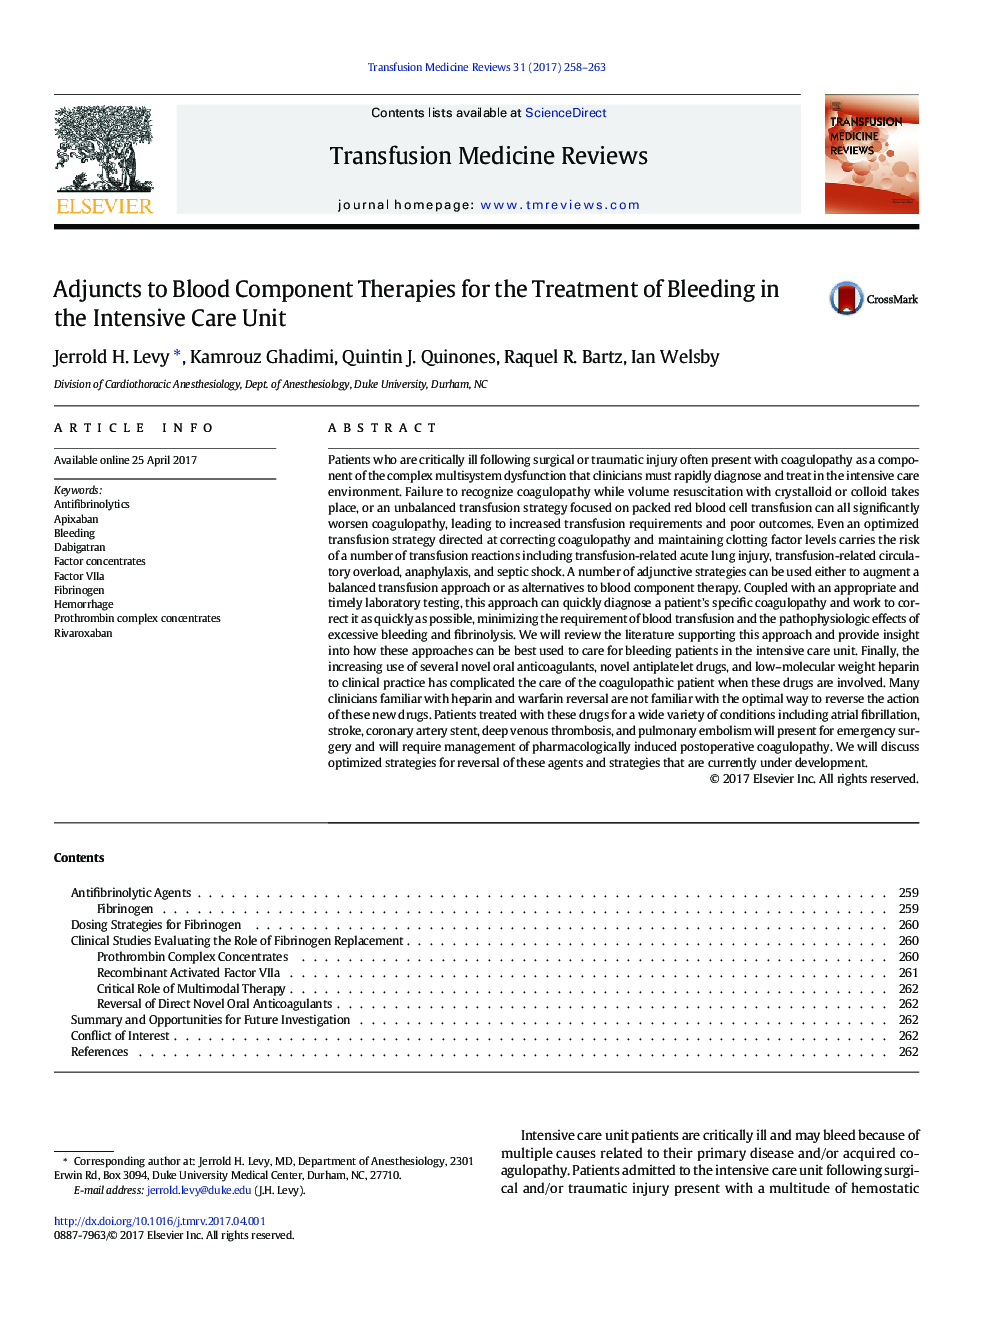 Adjuncts to Blood Component Therapies for the Treatment of Bleeding in the Intensive Care Unit